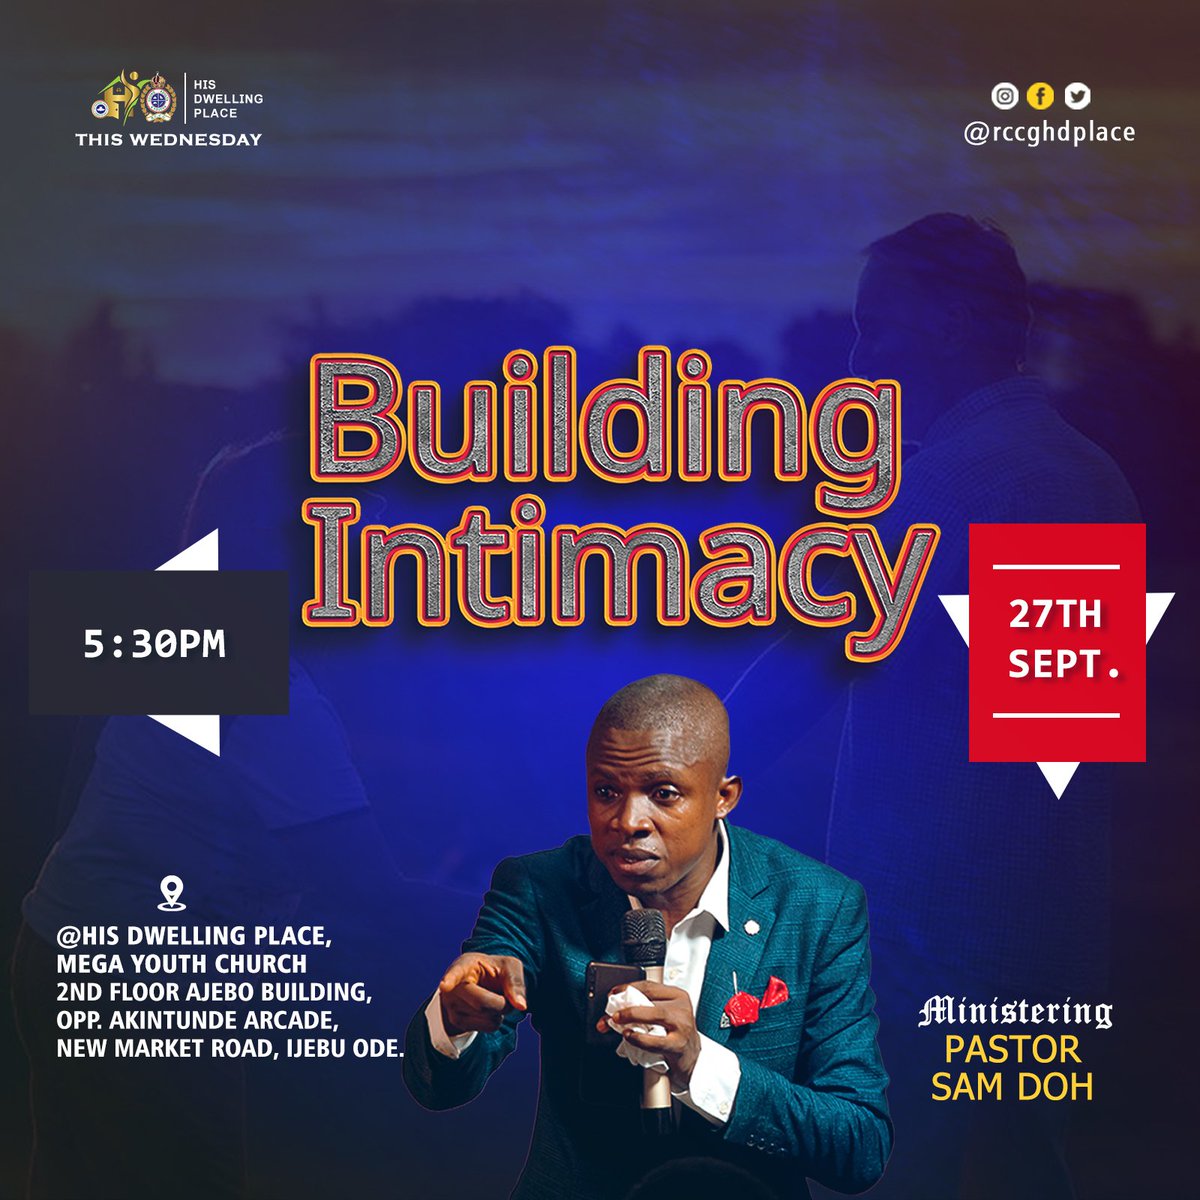 It's important to have a relationship, retaining it requires building intimacy. 

Join us this Wednesday as we roundup our relationship month with  'building intimacy'

Don't miss it

#BuildingIntimacy
#rccghdplace 
#RCCGYAYA #rccgworldwide 
#IjebuOde 
#YouthChurch